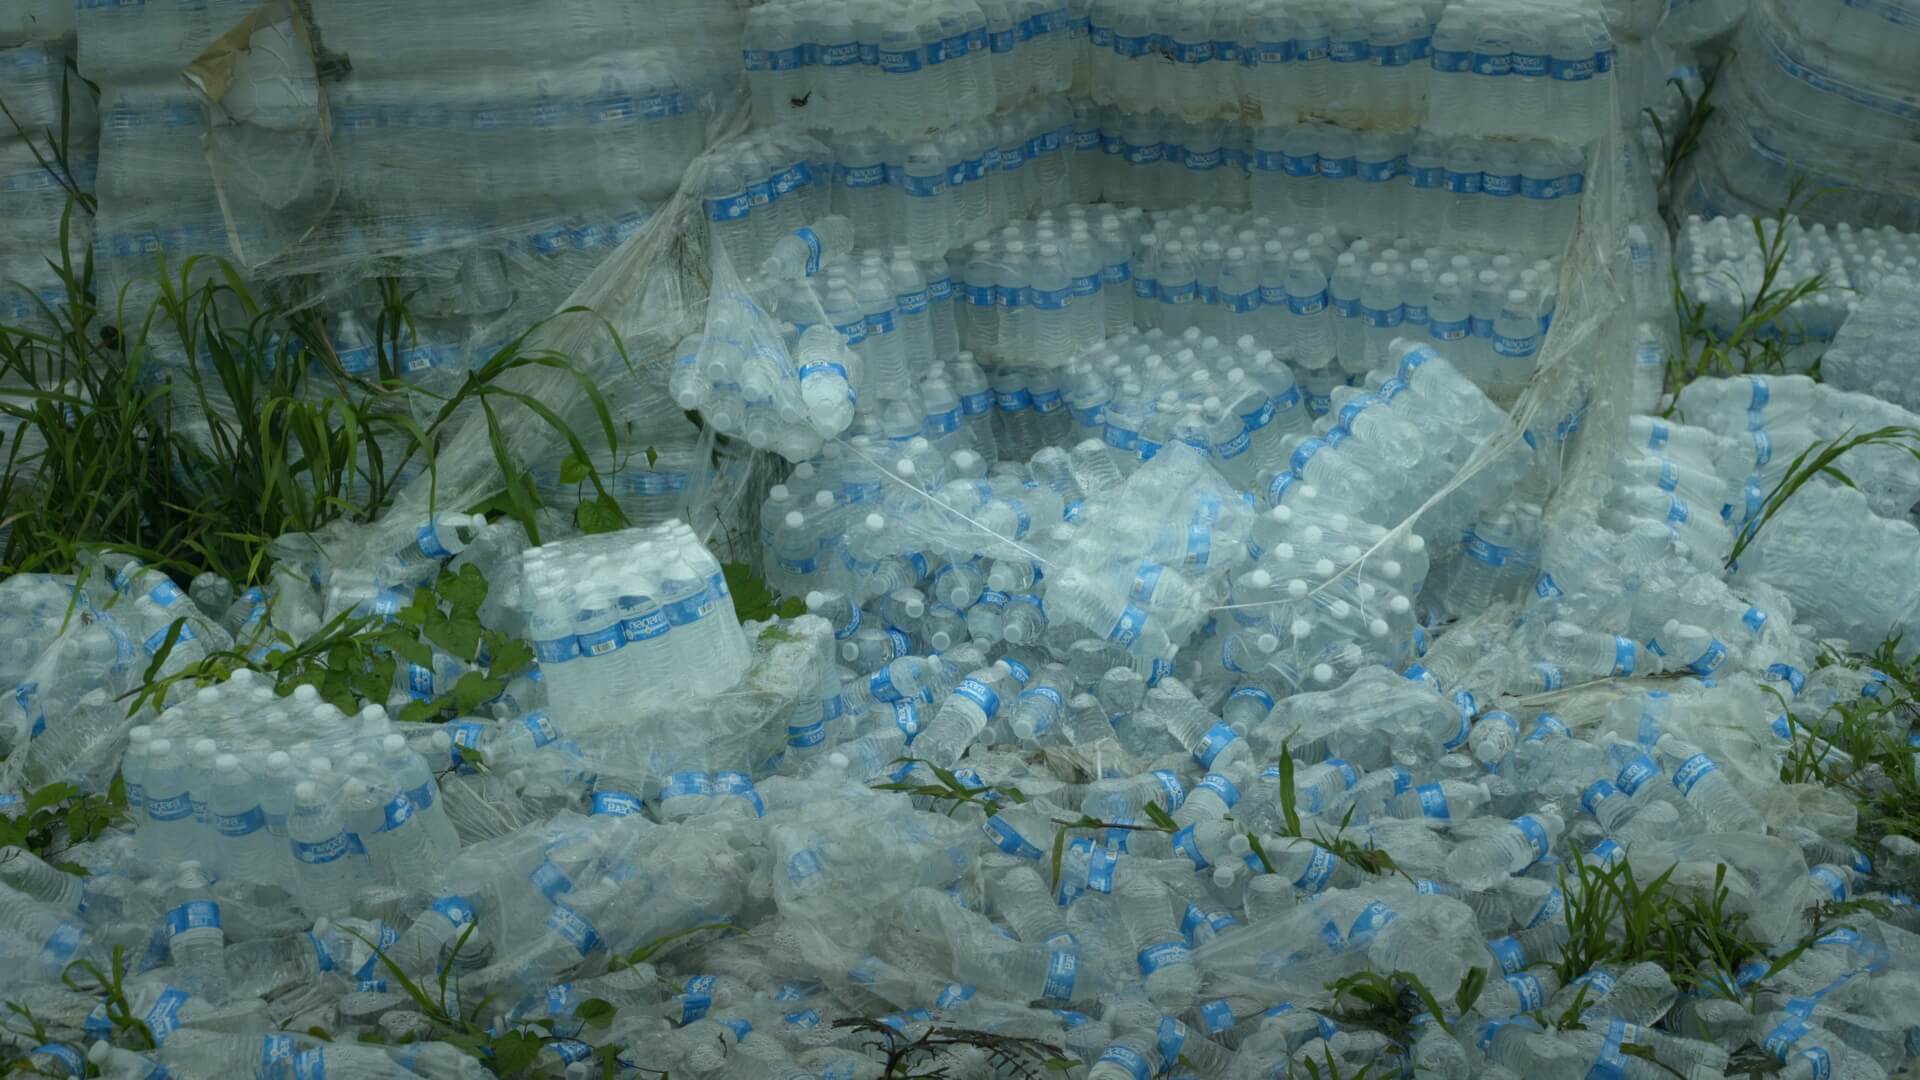 Still from Landfall. Hundreds of plastic bottles are packaged in plastic. Some of the plastic is broken open and the bottles have been spread all over the ground.